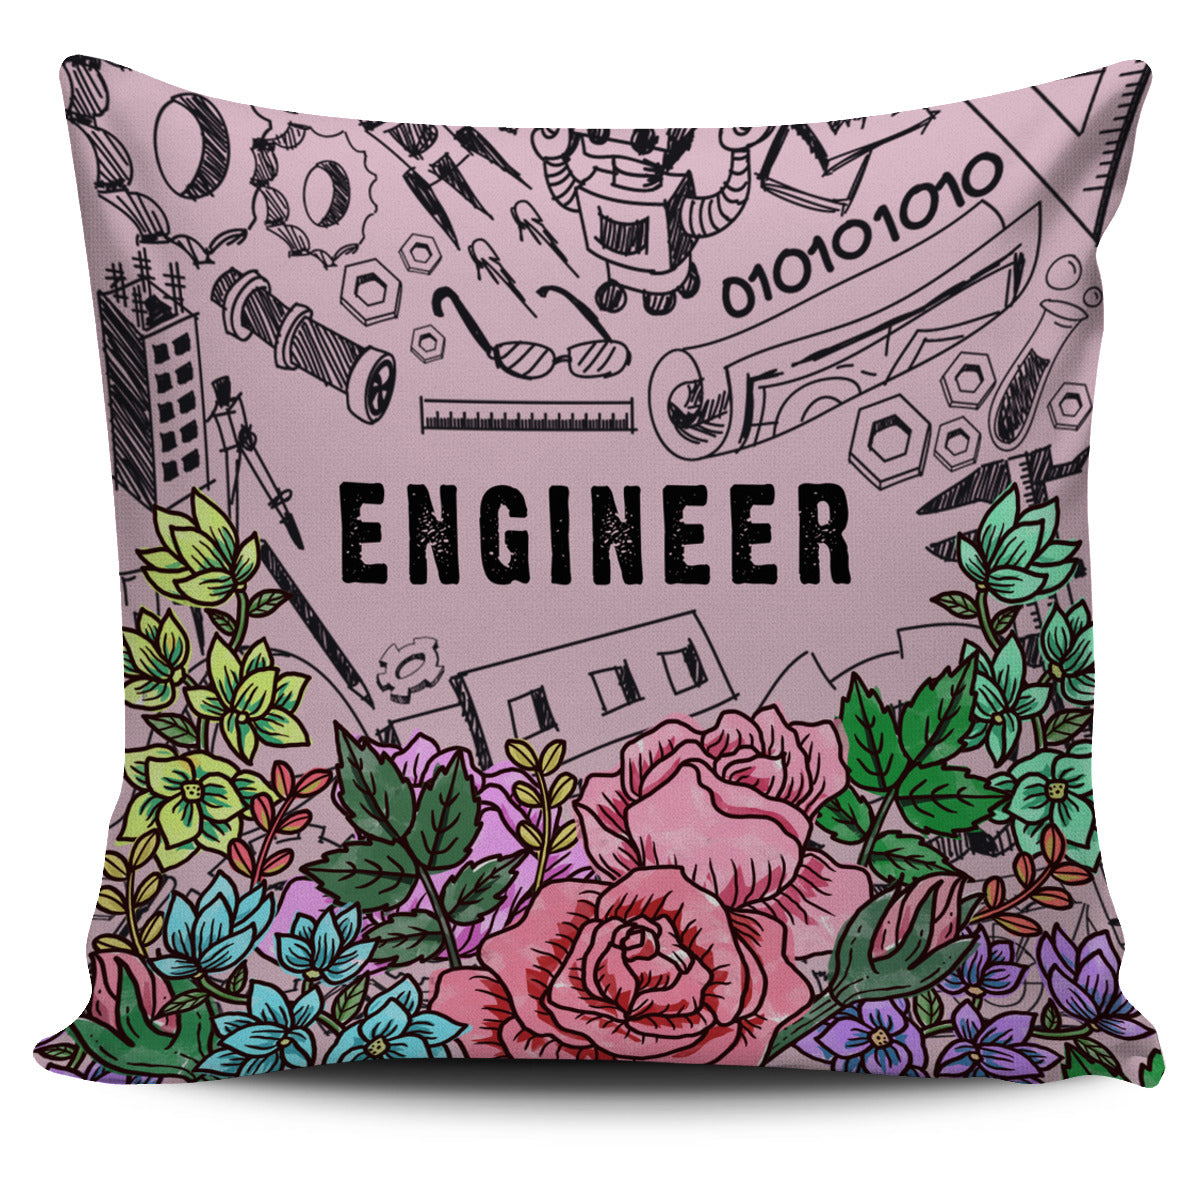 Engineer Doodles Pillow Cover